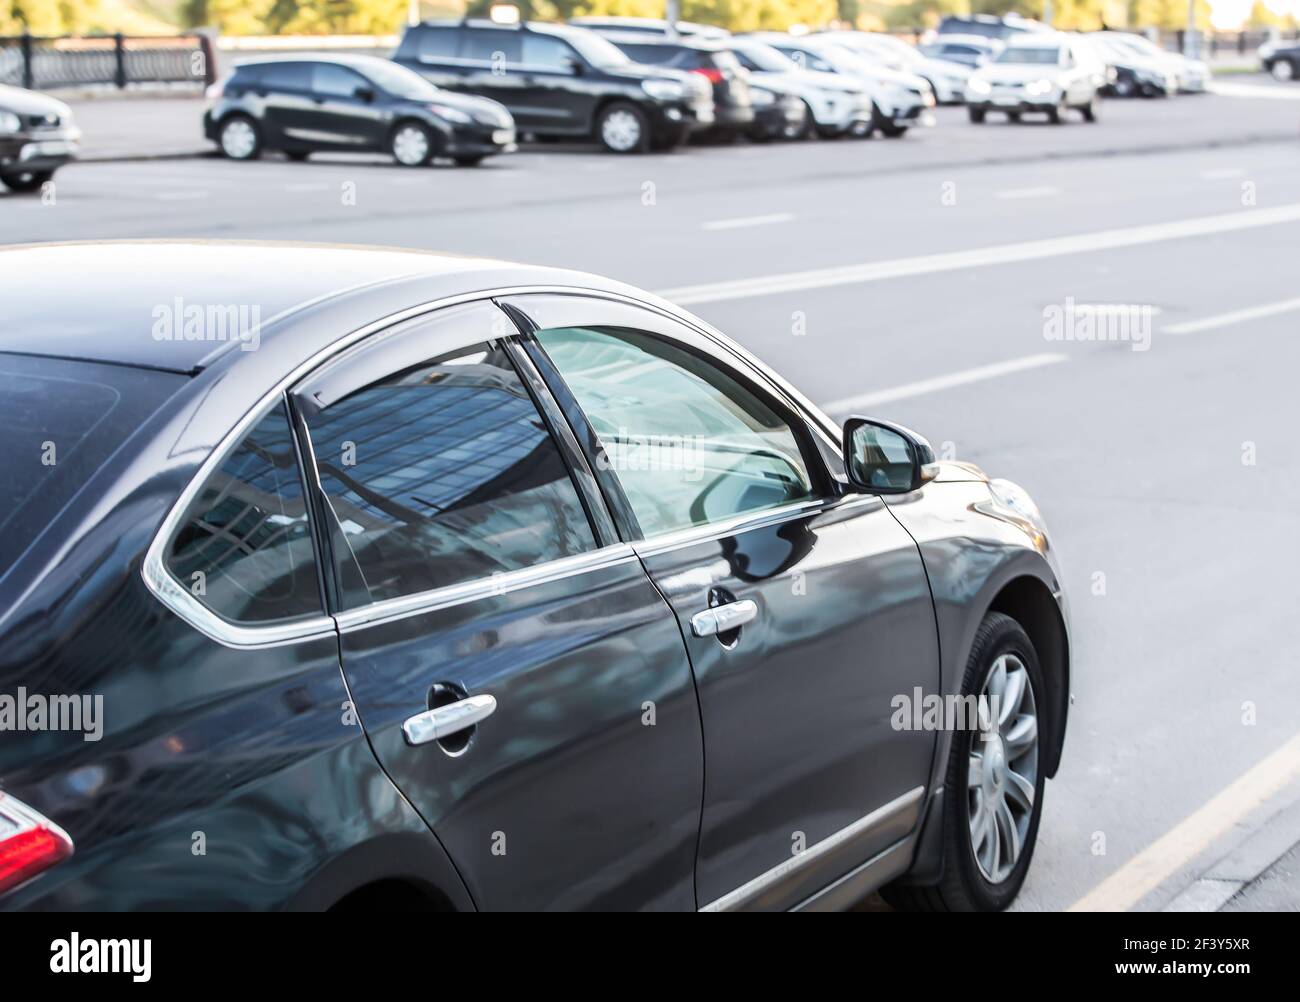 Car moves on a multi-lane road. On the opposite side of the road several cars are parked. Stock Photo